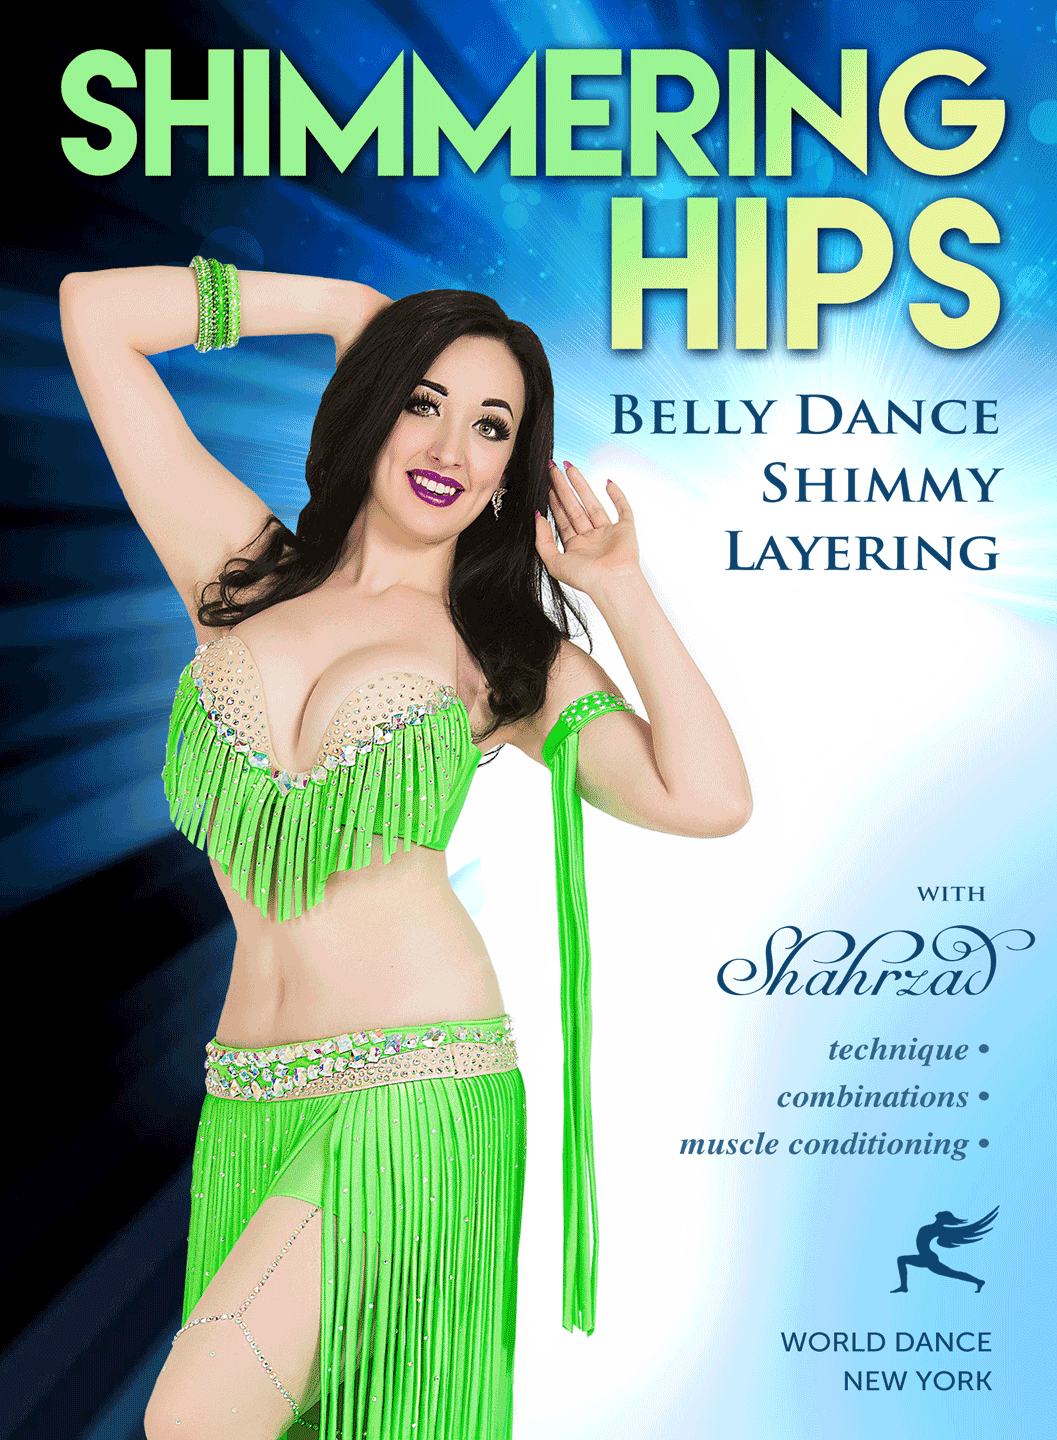 Shimmering Hips - Belly Dance Shimmy Layering with Shahrzad - INSTANT VIDEO / DVD - World Dance New York